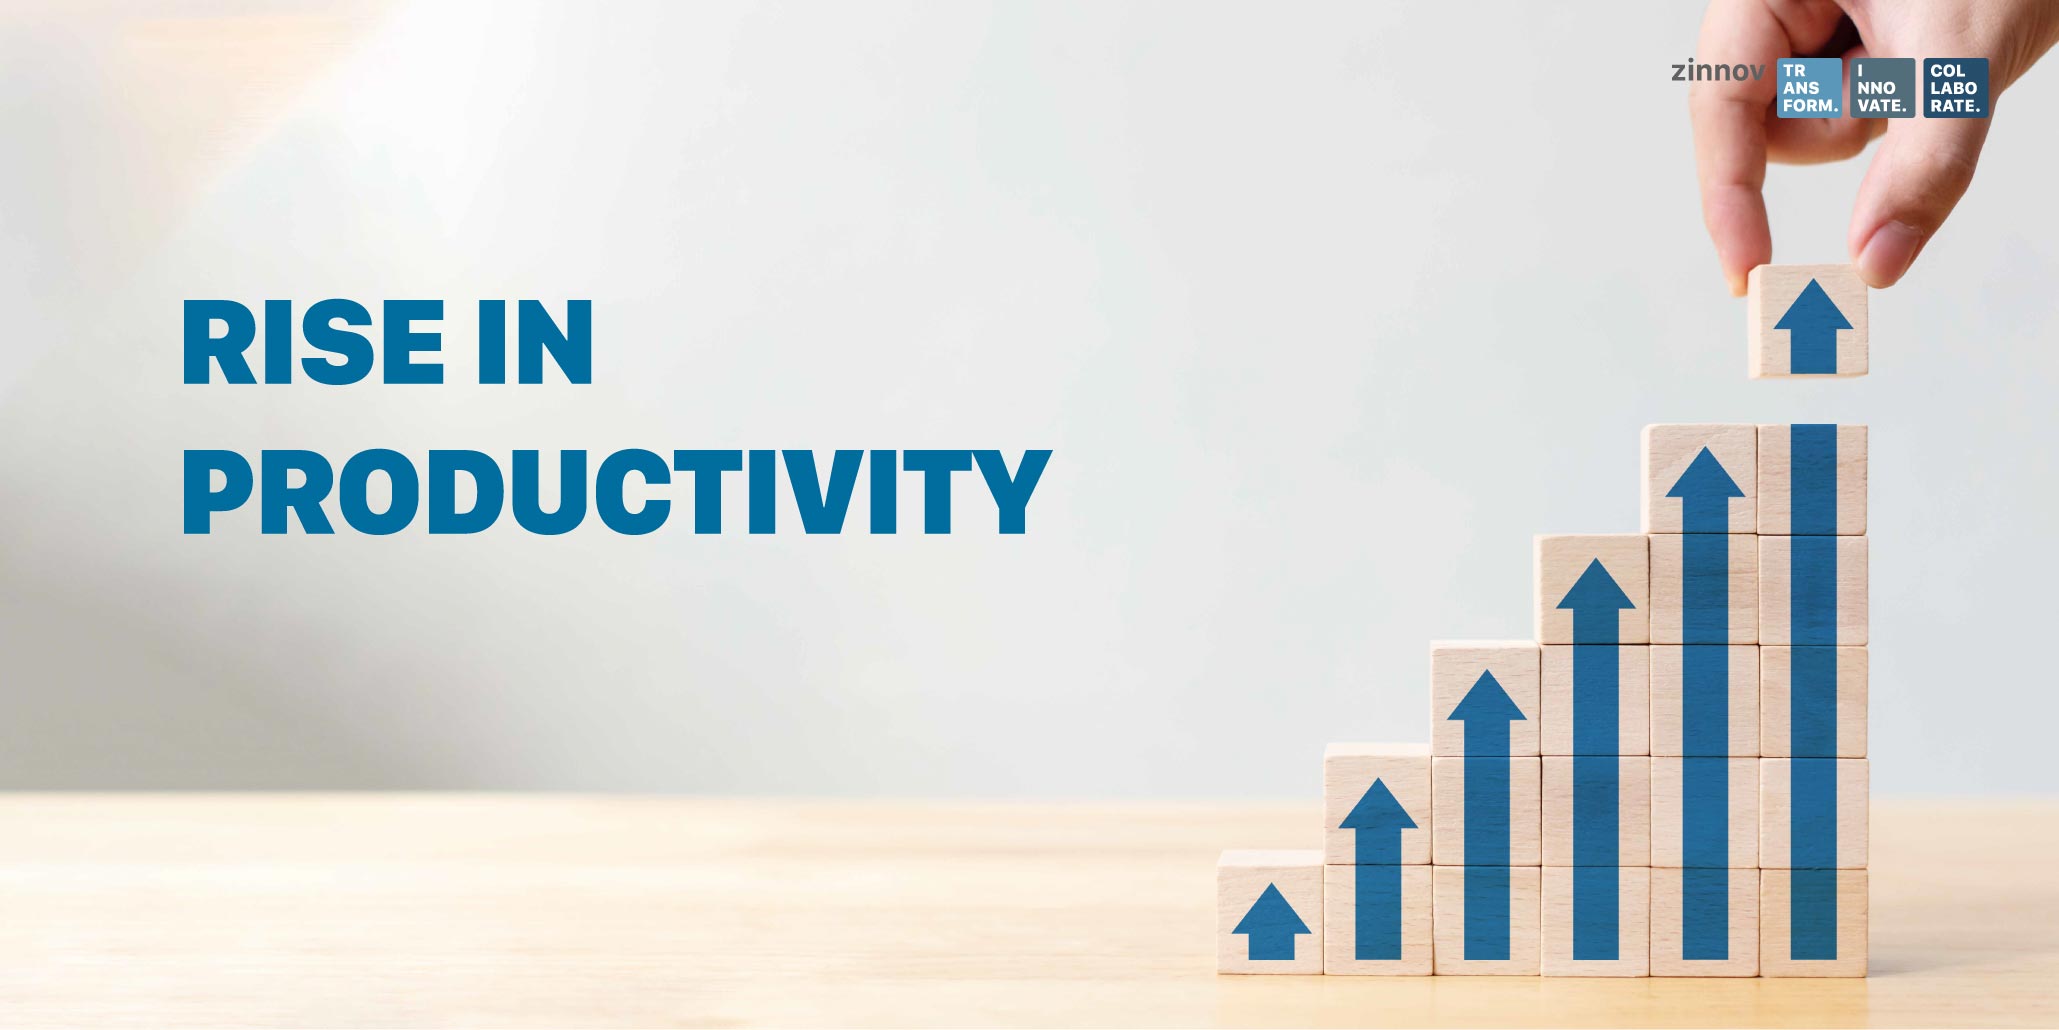 Rise in productivity